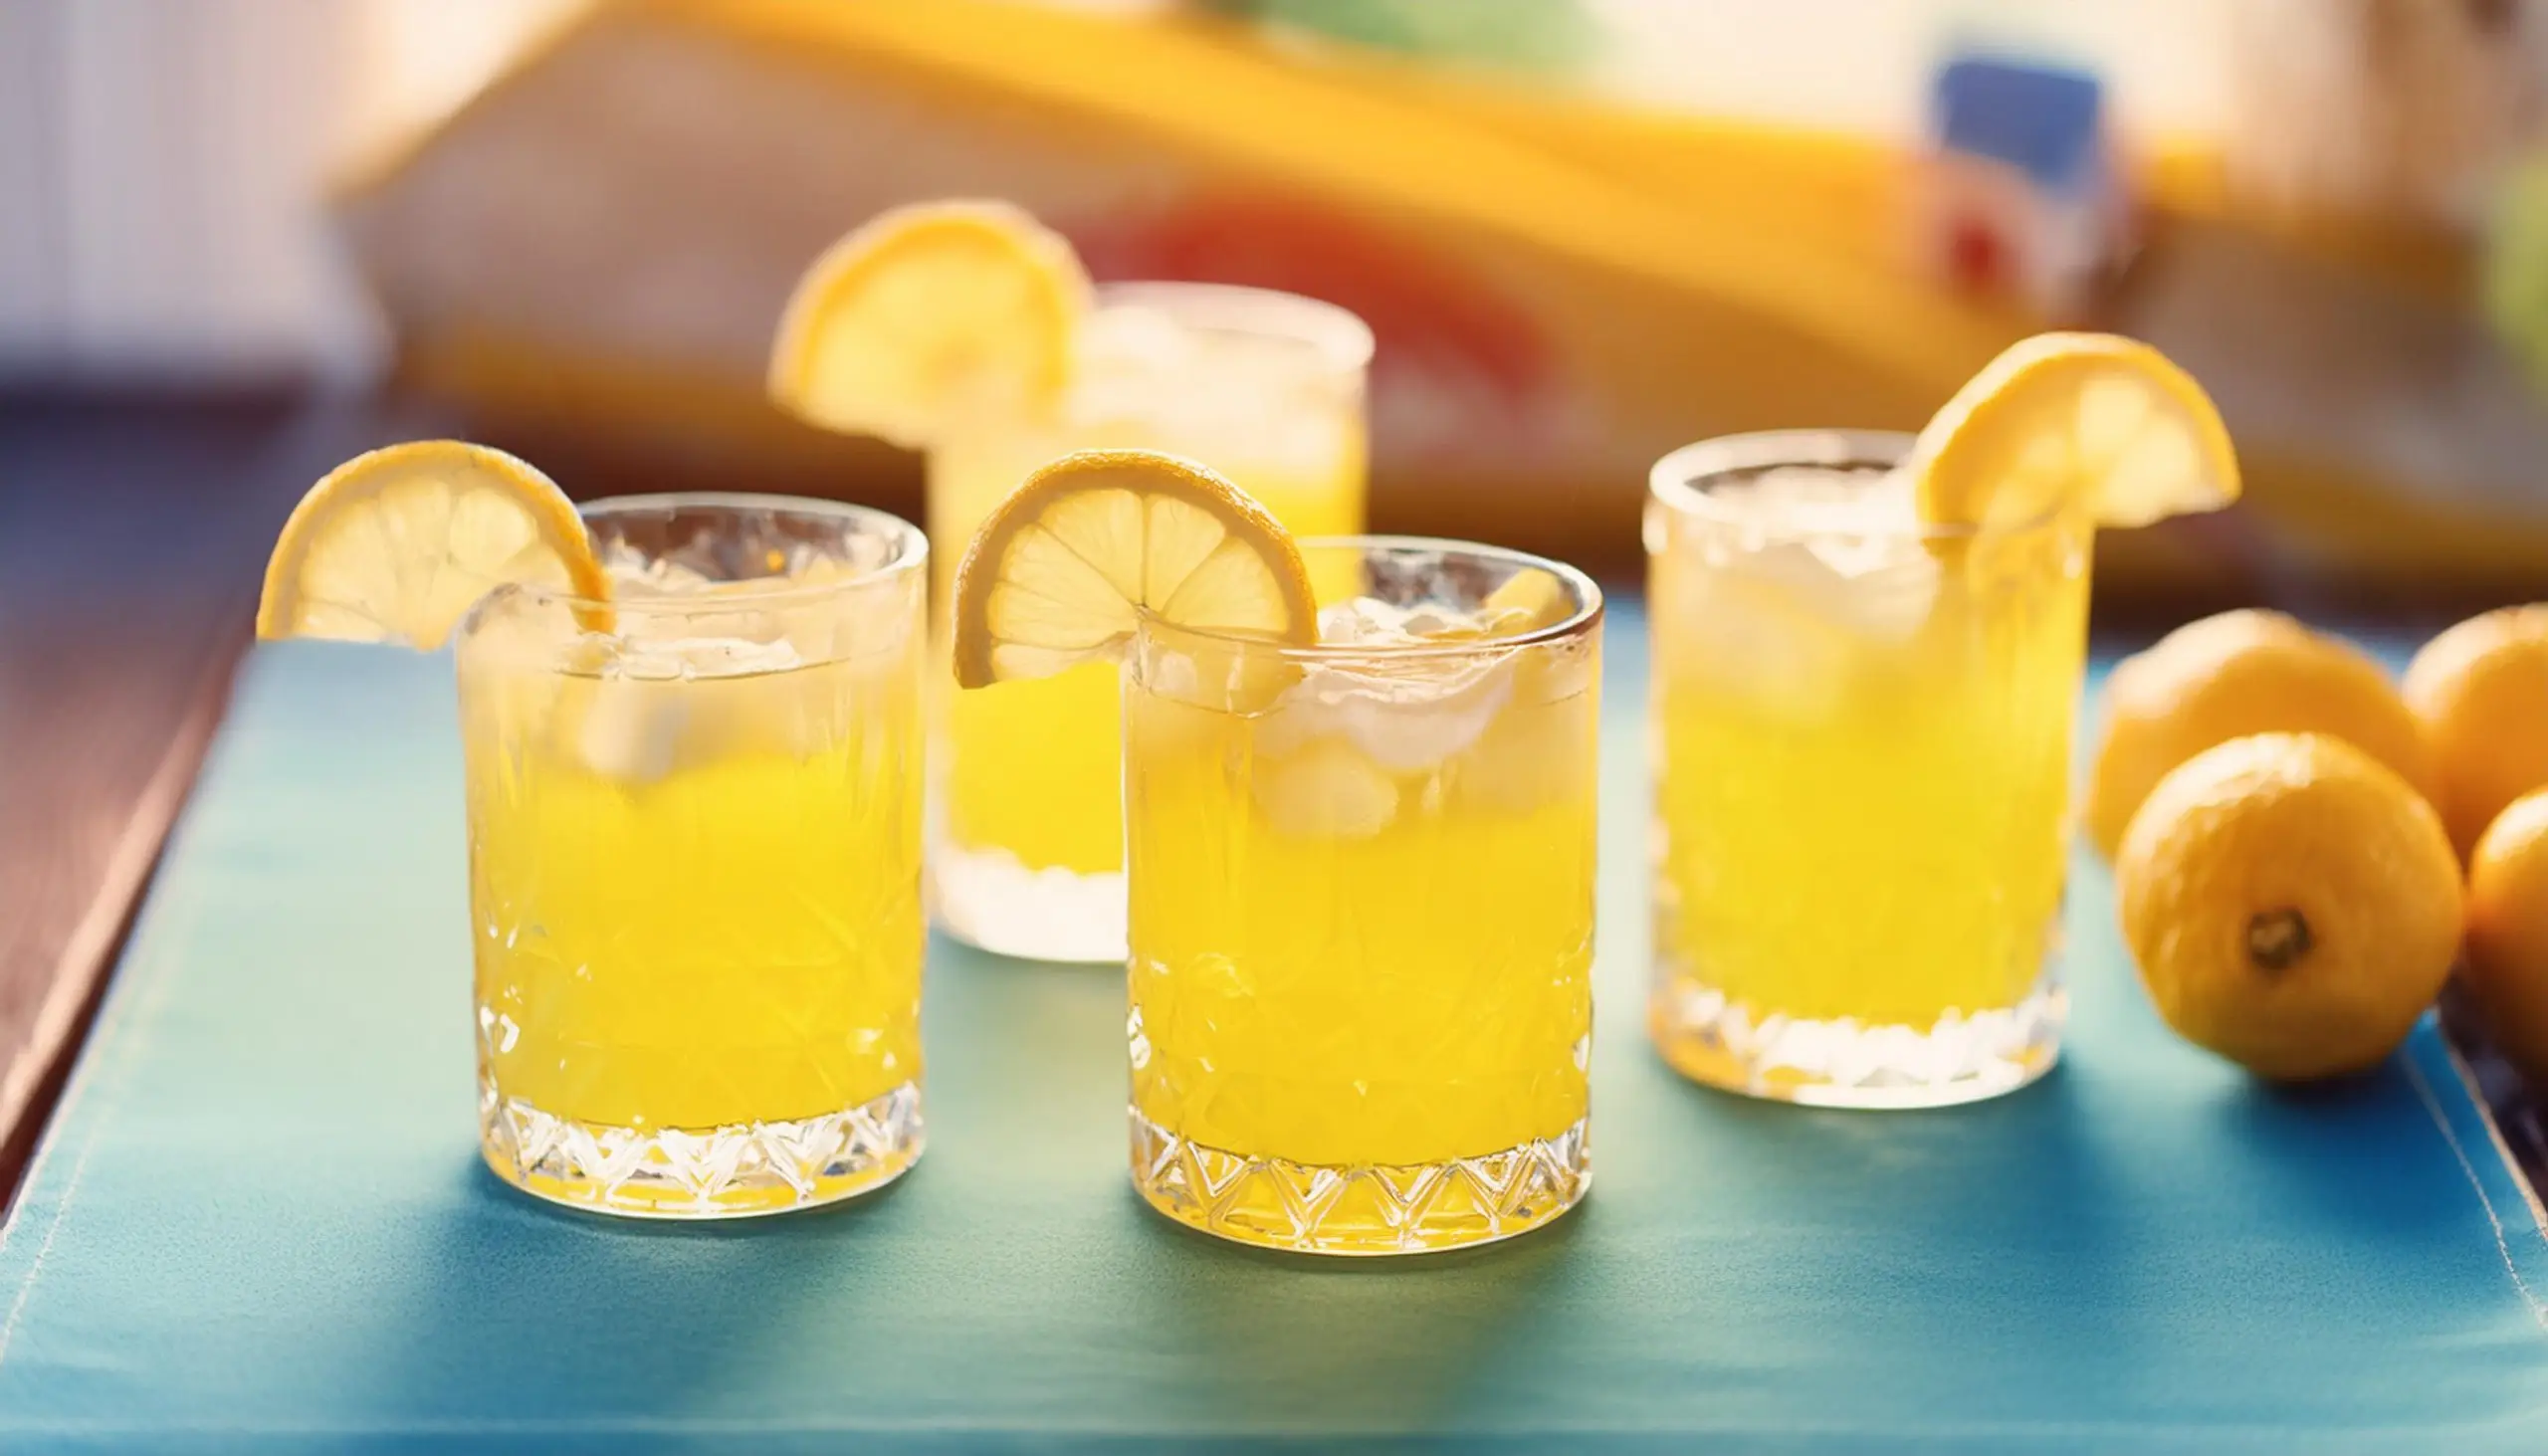 Four Tequila Pineapple Rum Punch cocktails served in lowball glasses with lemon garnish